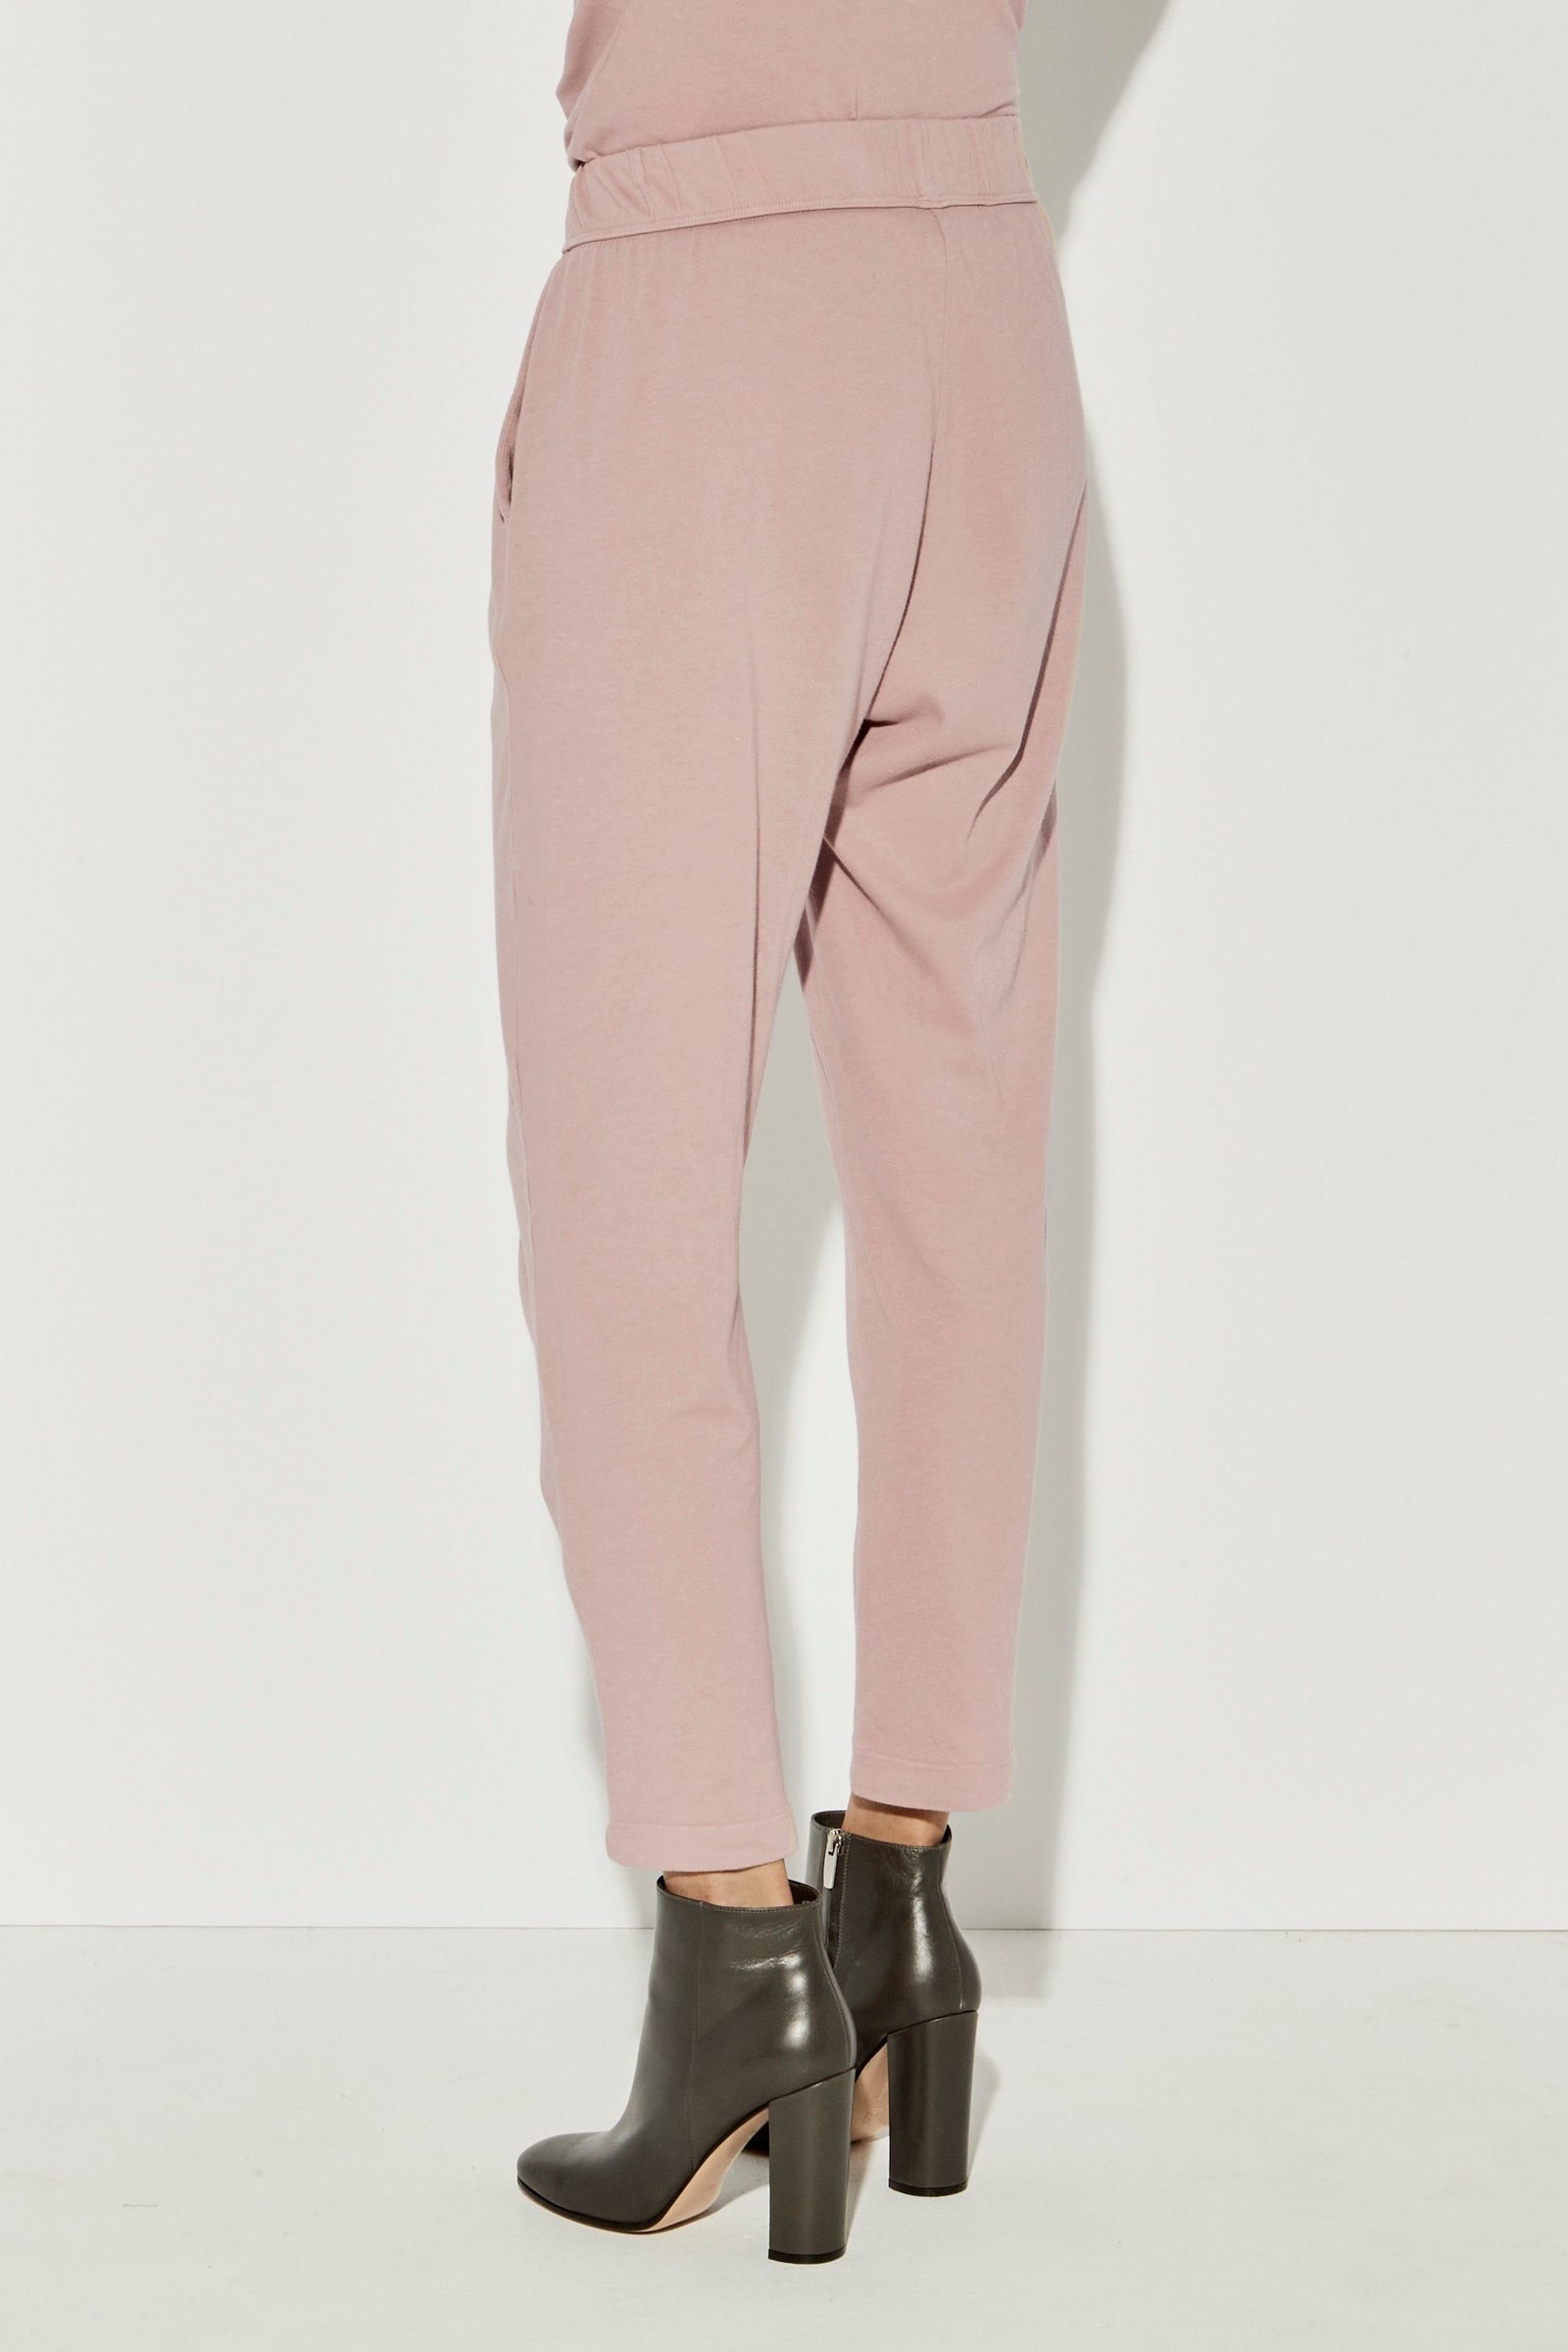 Petal Pink Classic Jersey Easy Pant Back Close-Up View